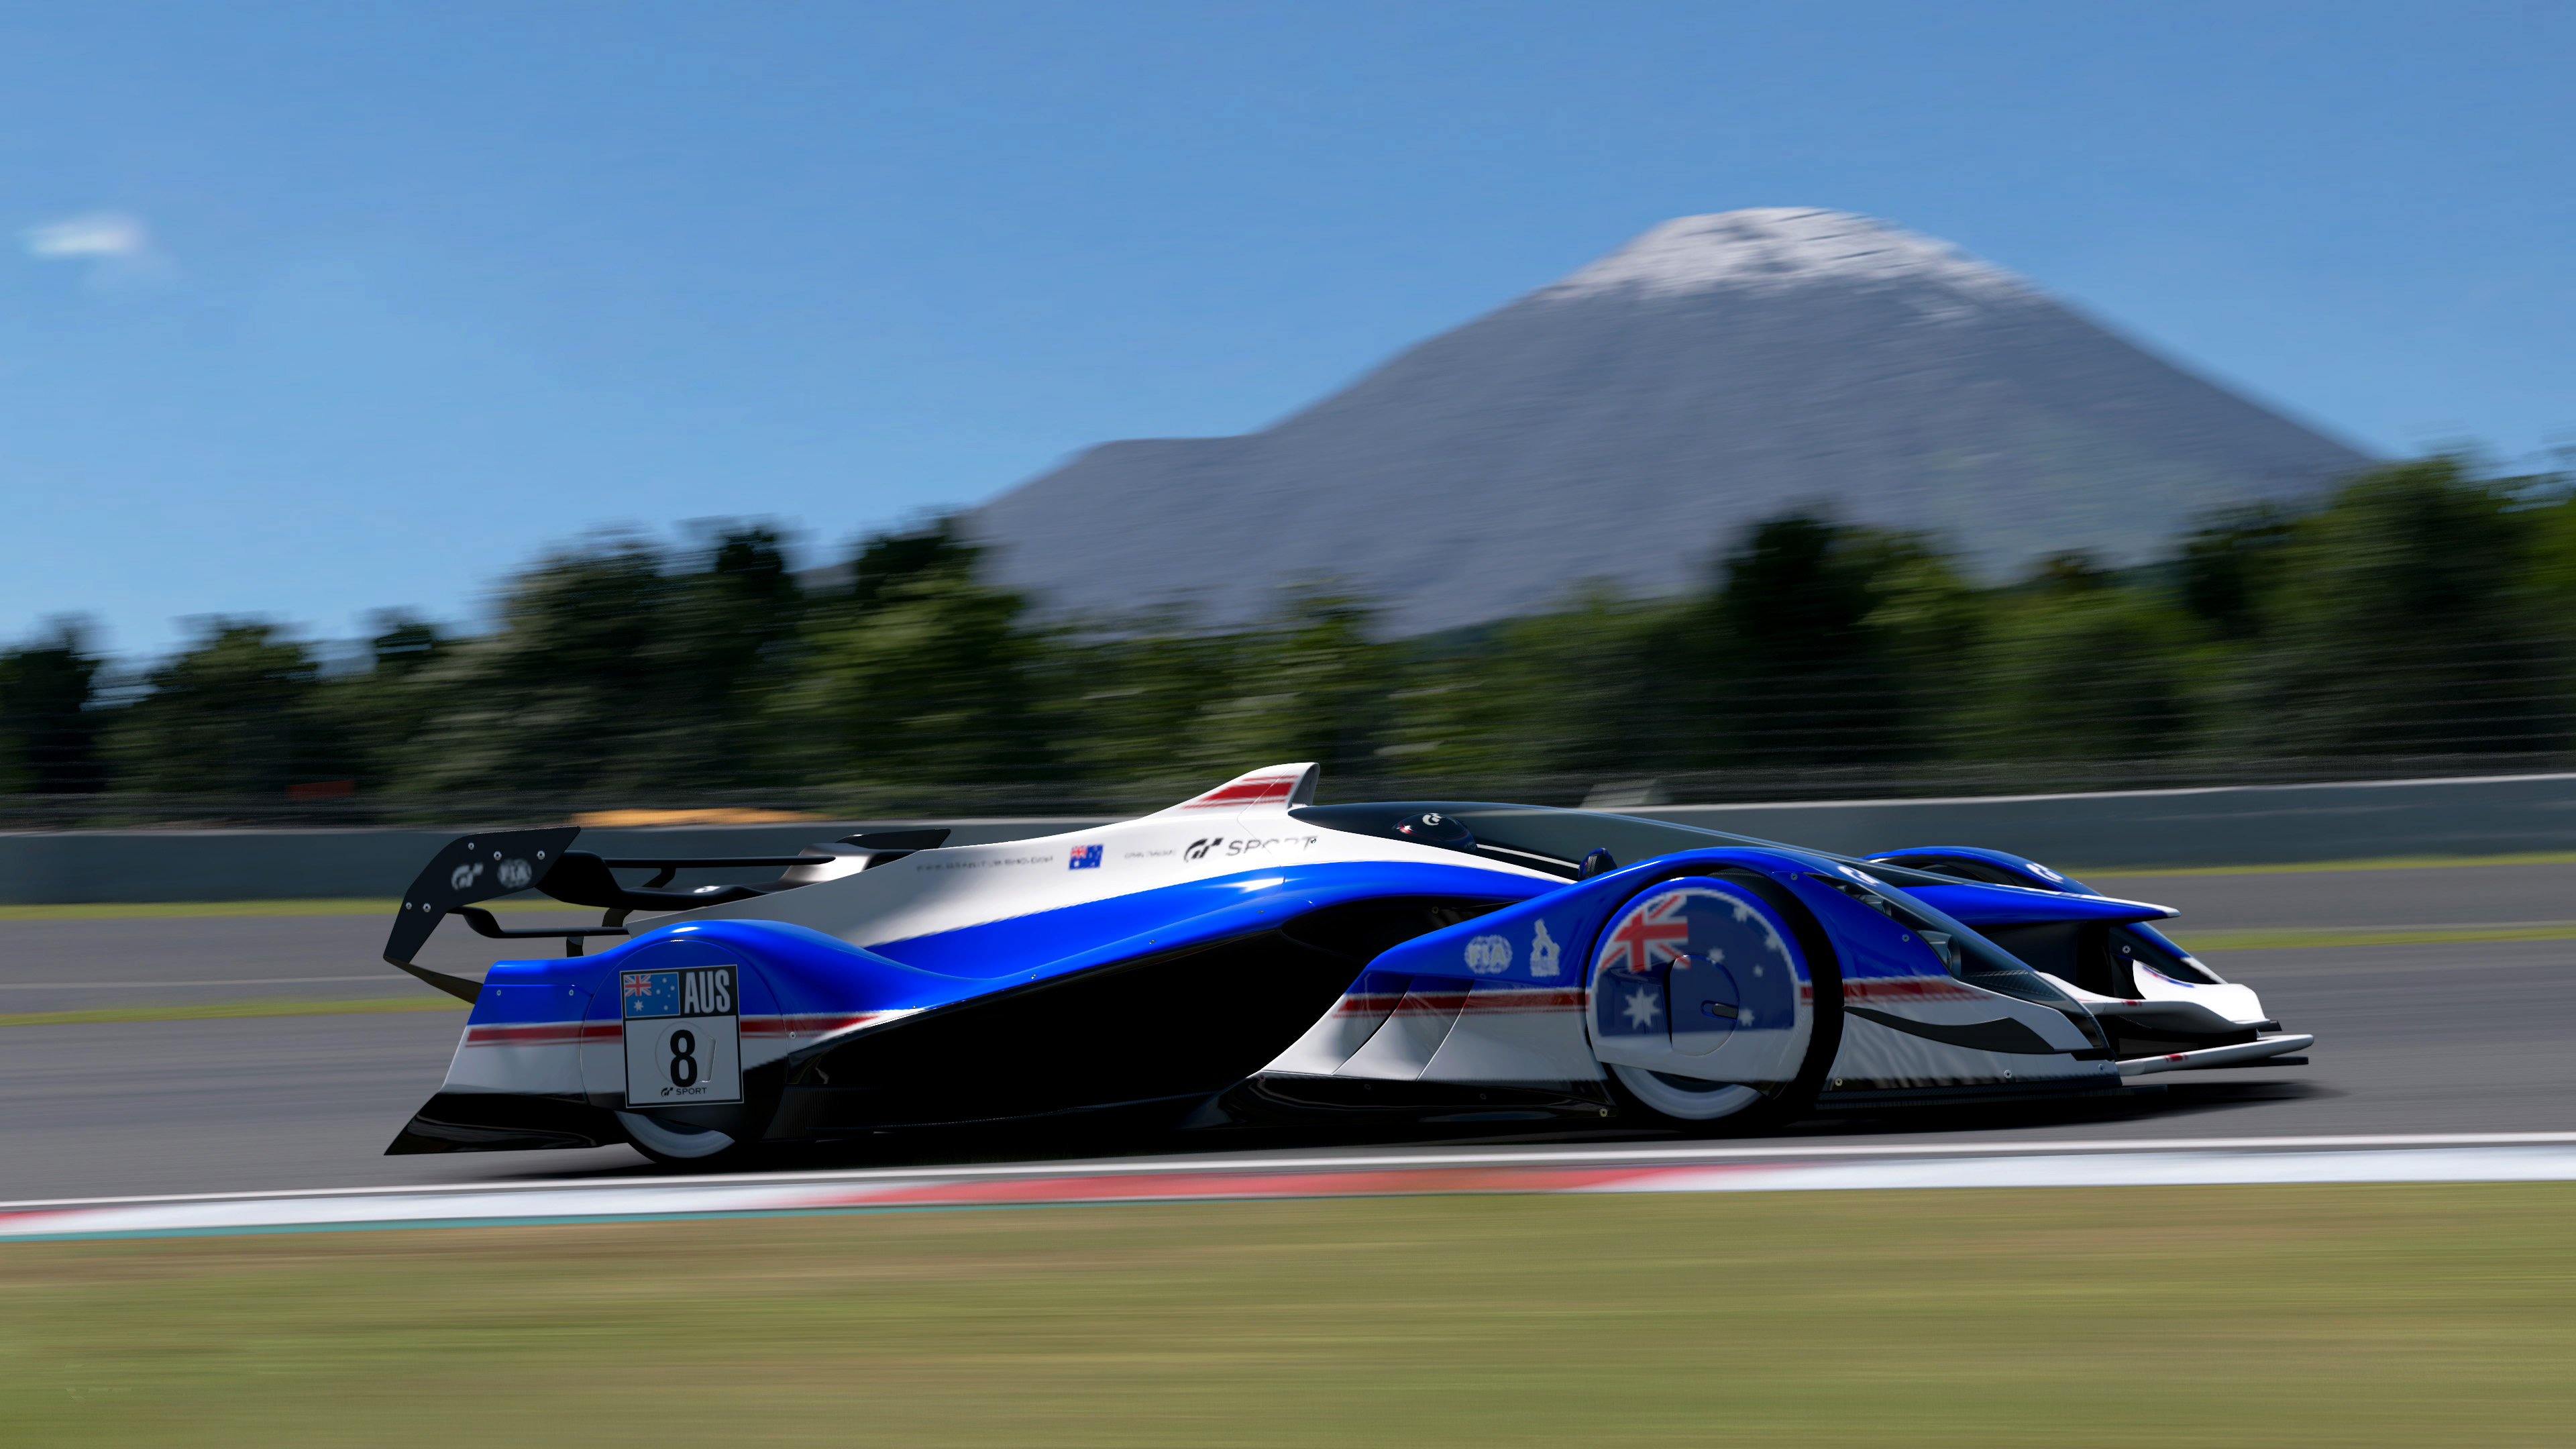 Sony's racing car AI just destroyed its human competitors—by being